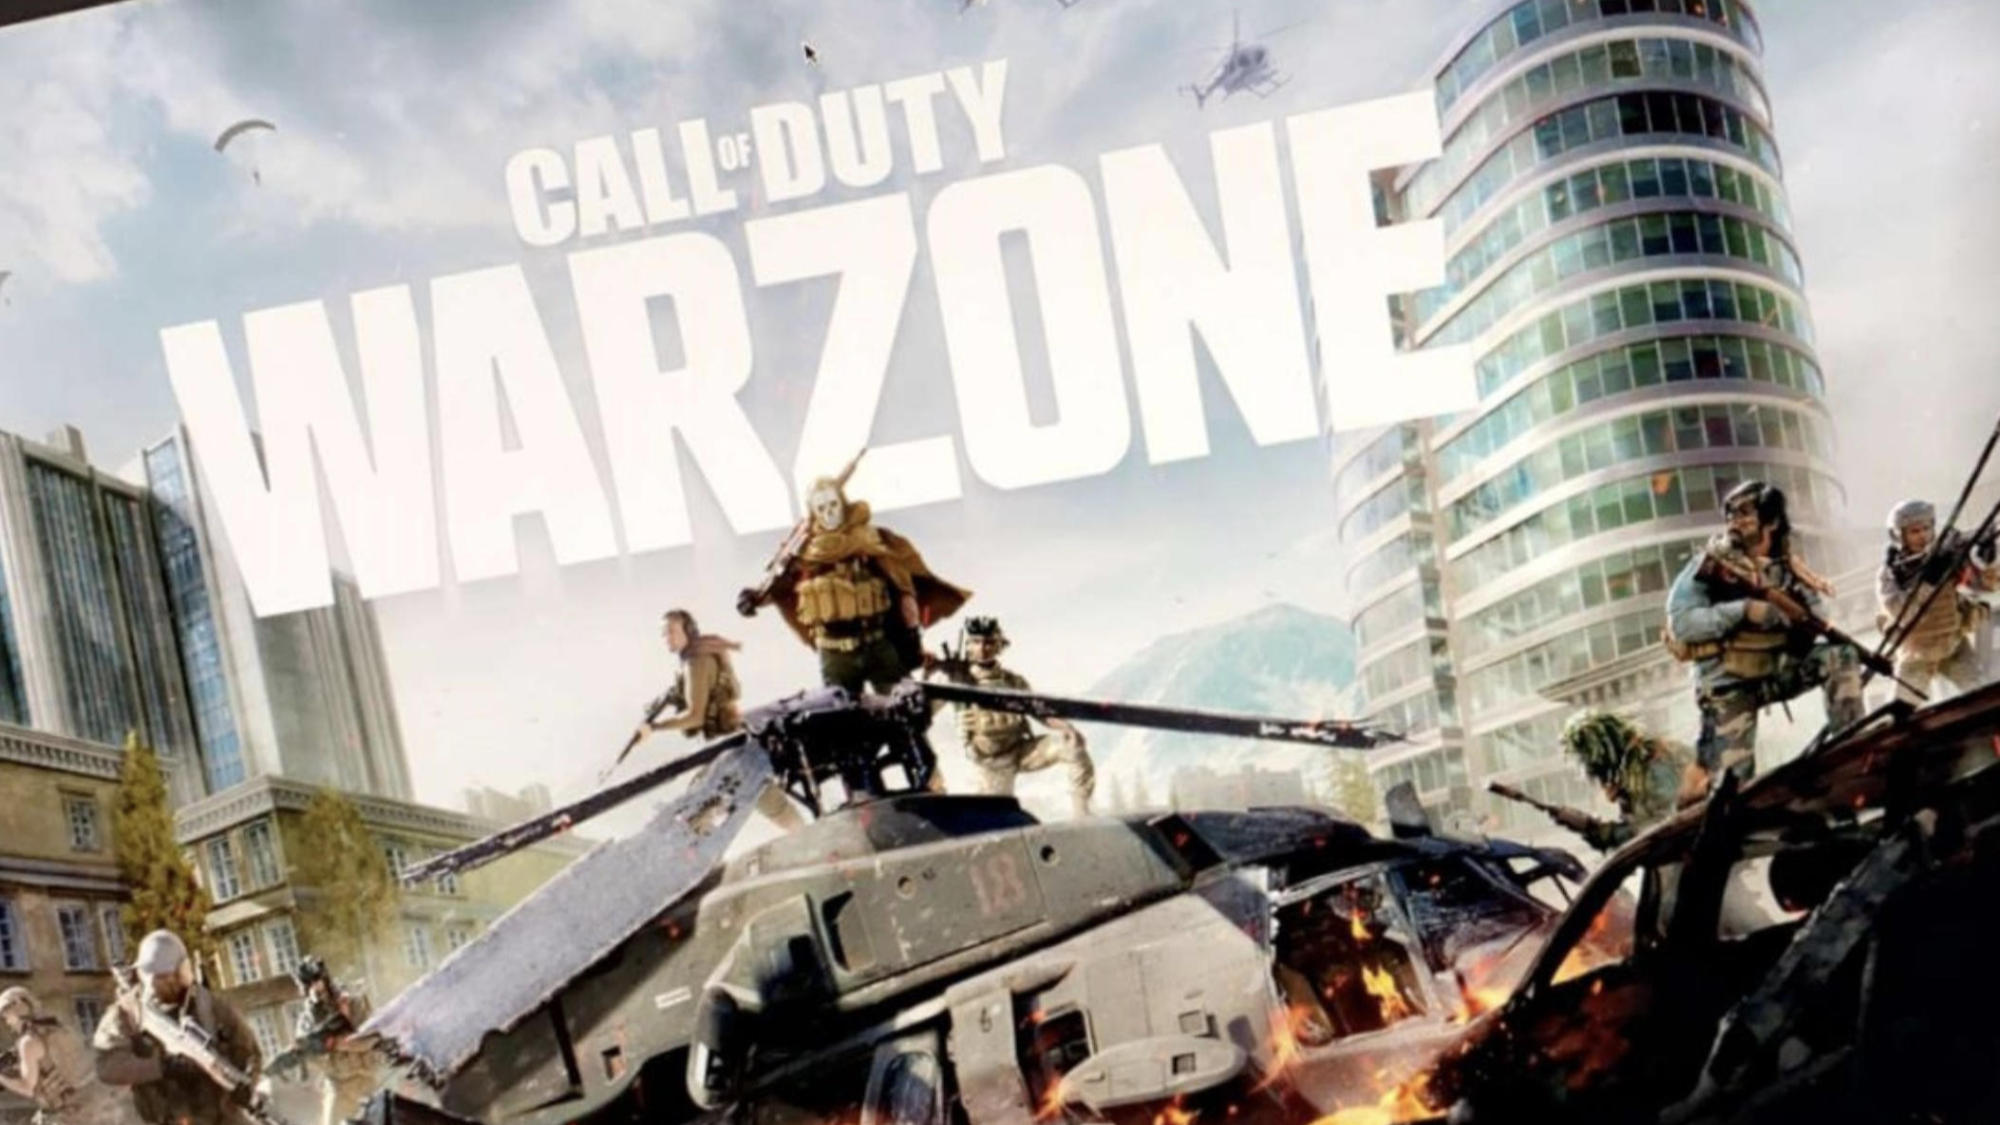 Warzone Mobile News on X: 📢 UPDATE Call of Duty®: Warzone™ Mobile limited  closed alpha is being extended now & the app will receive v1.5.0 update  shortly.  / X